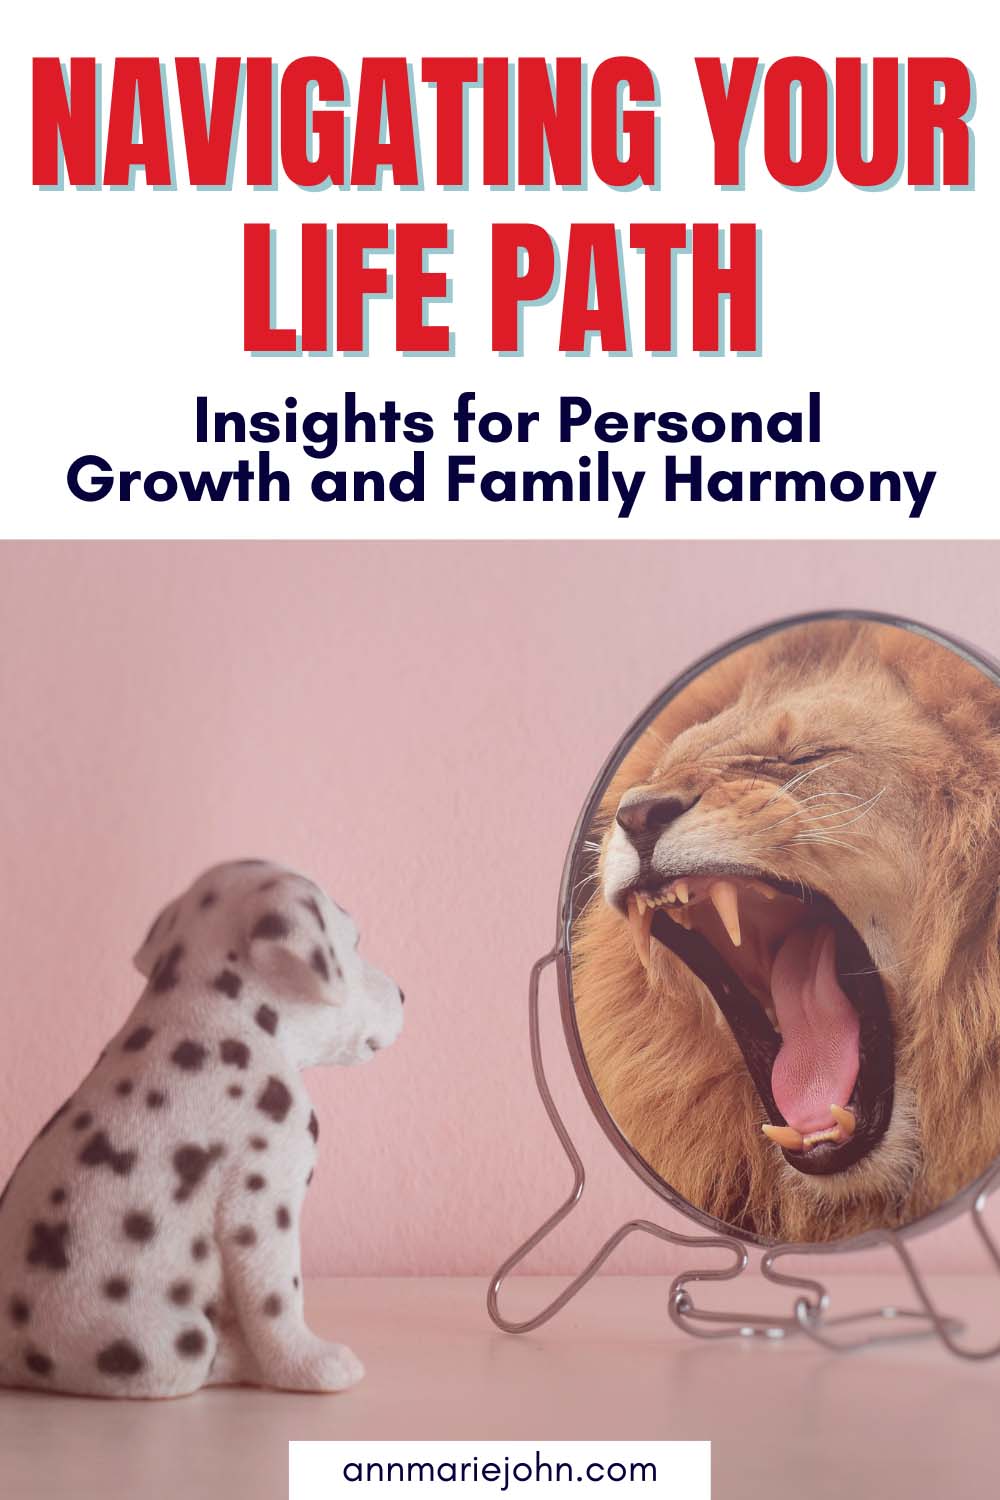 Navigating Your Life Path: Insights for Personal Growth and Family Harmony